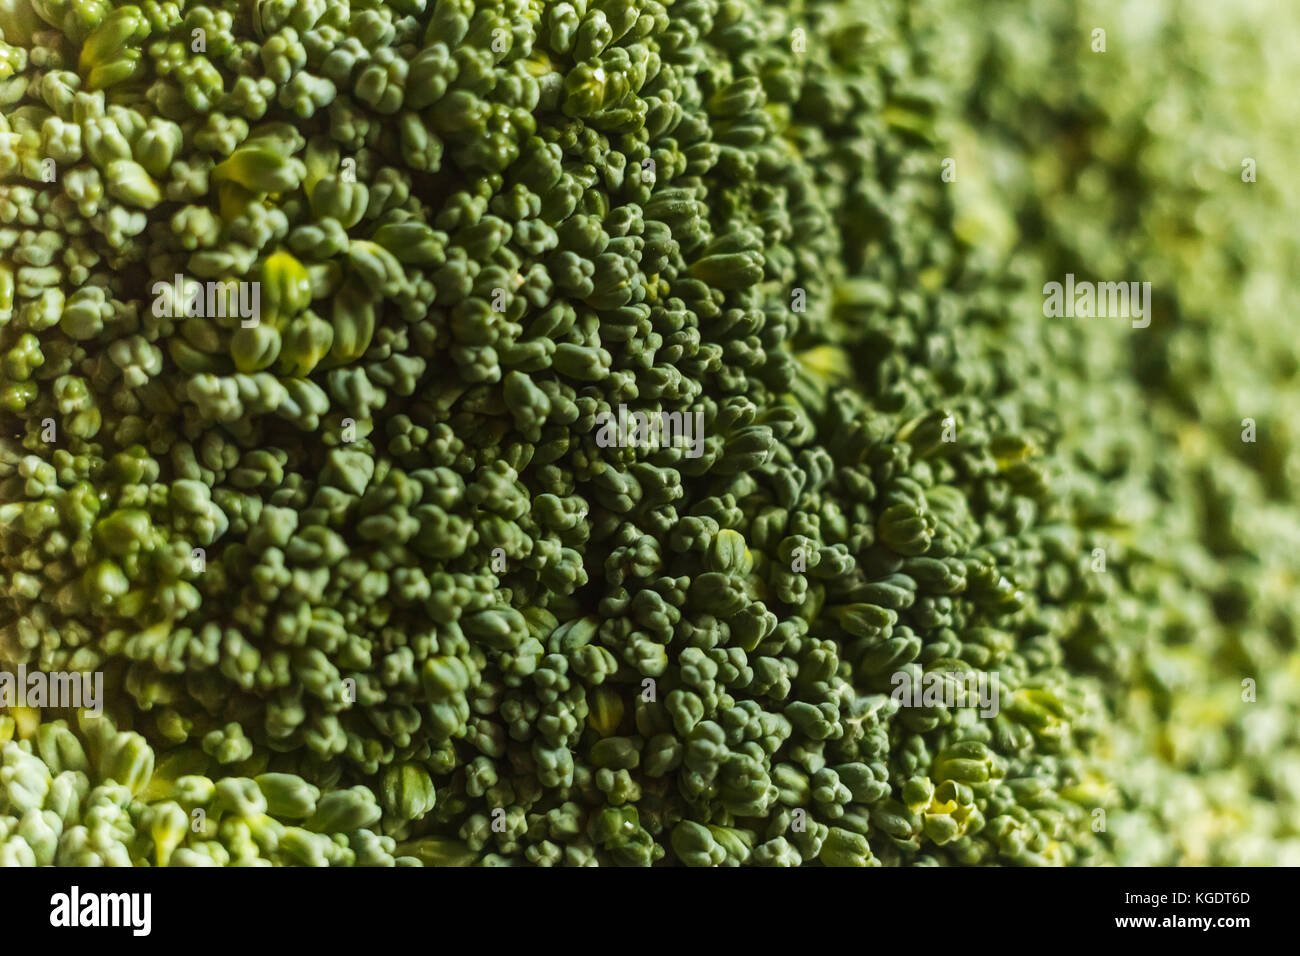 close-up photo of green broccoli flowers Stock Photo